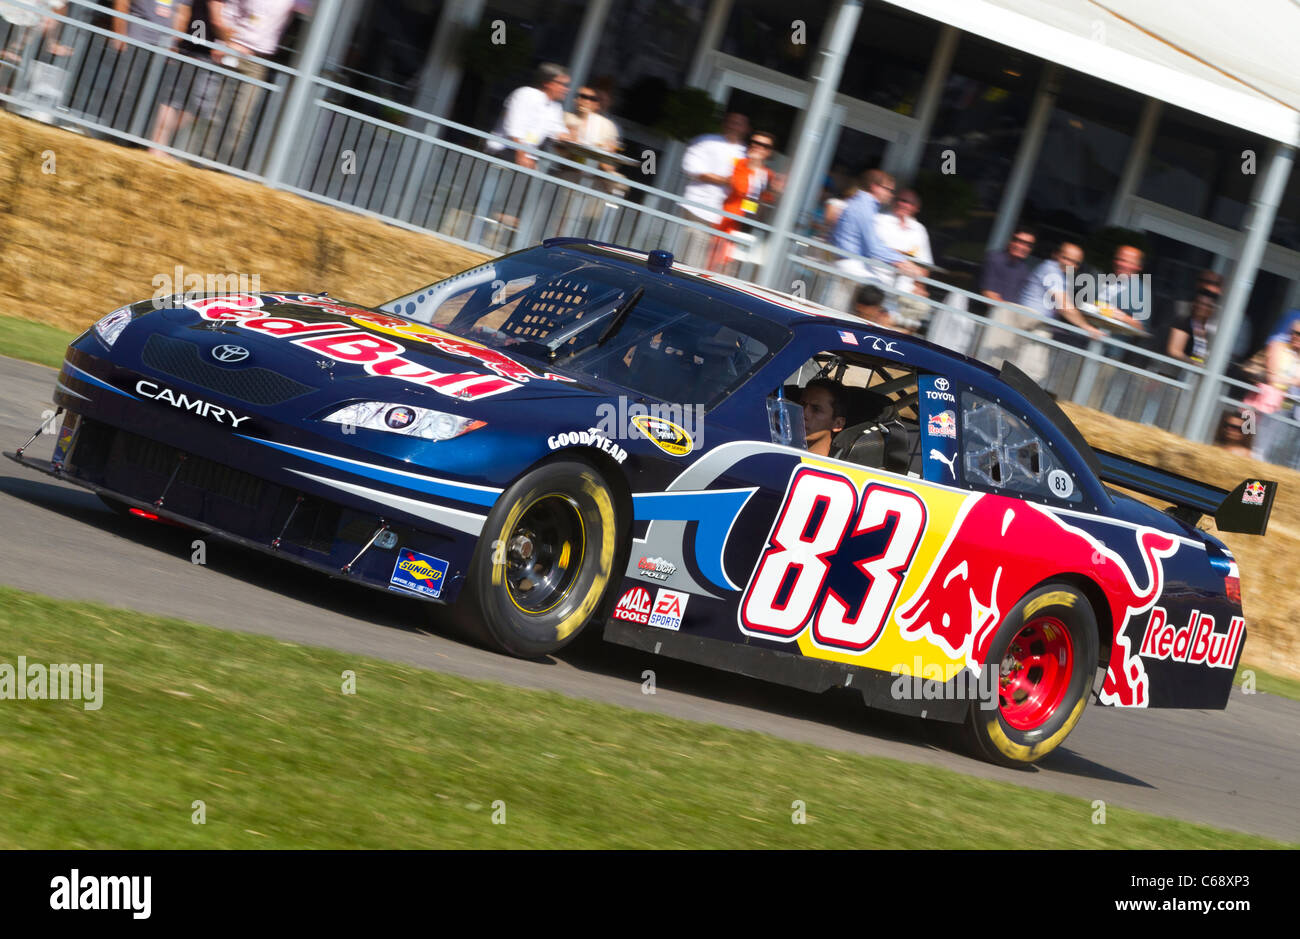 2007 Red Bull Racing Toyota Camry NASCAR auf der 2011 Goodwood Festival of Speed, Sussex, England, UK. Stockfoto